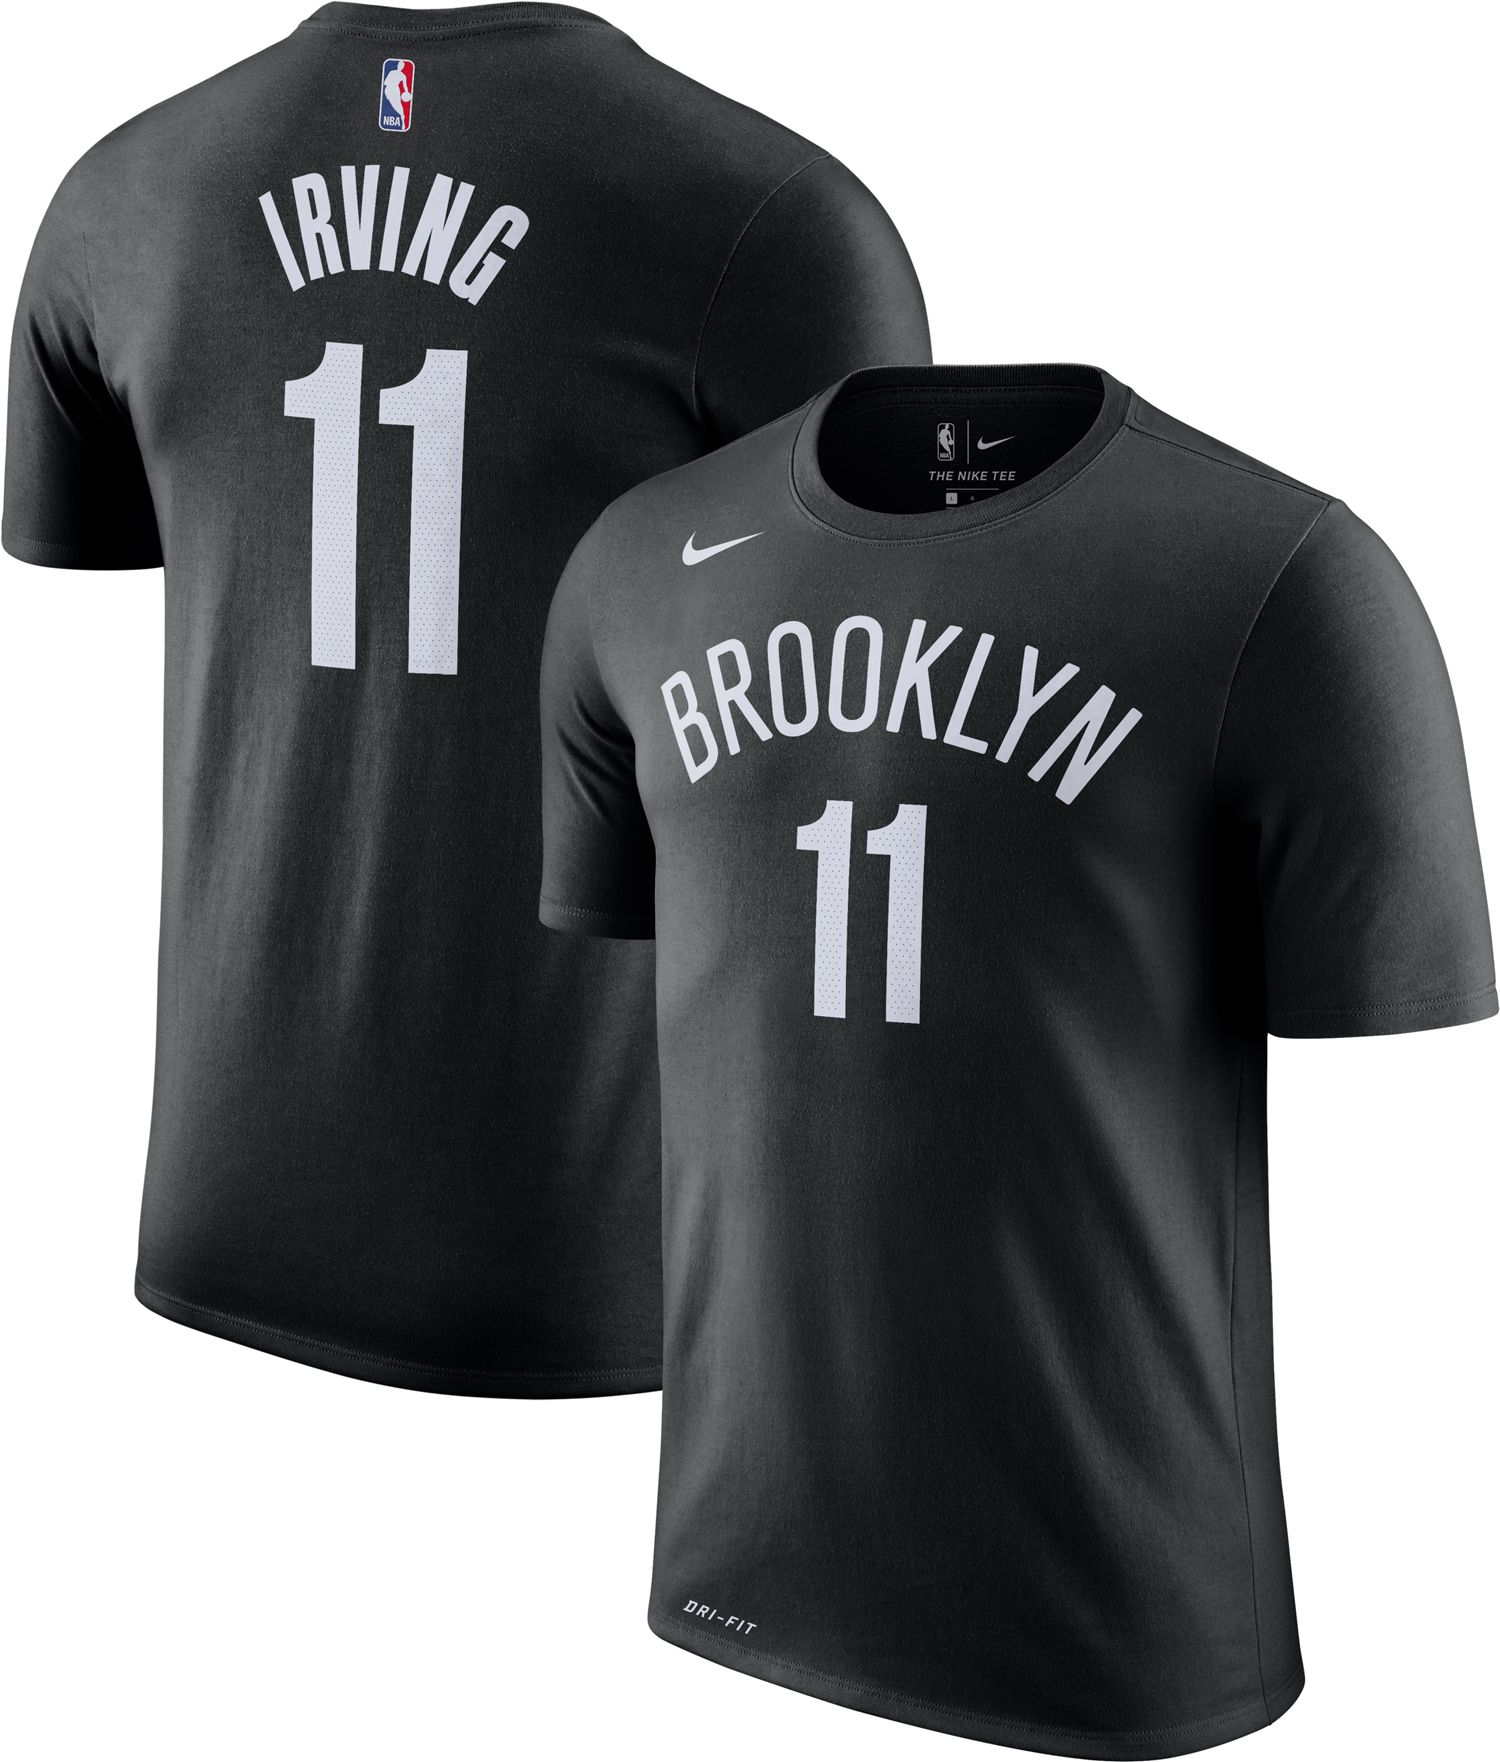 kyrie irving youth jersey gold